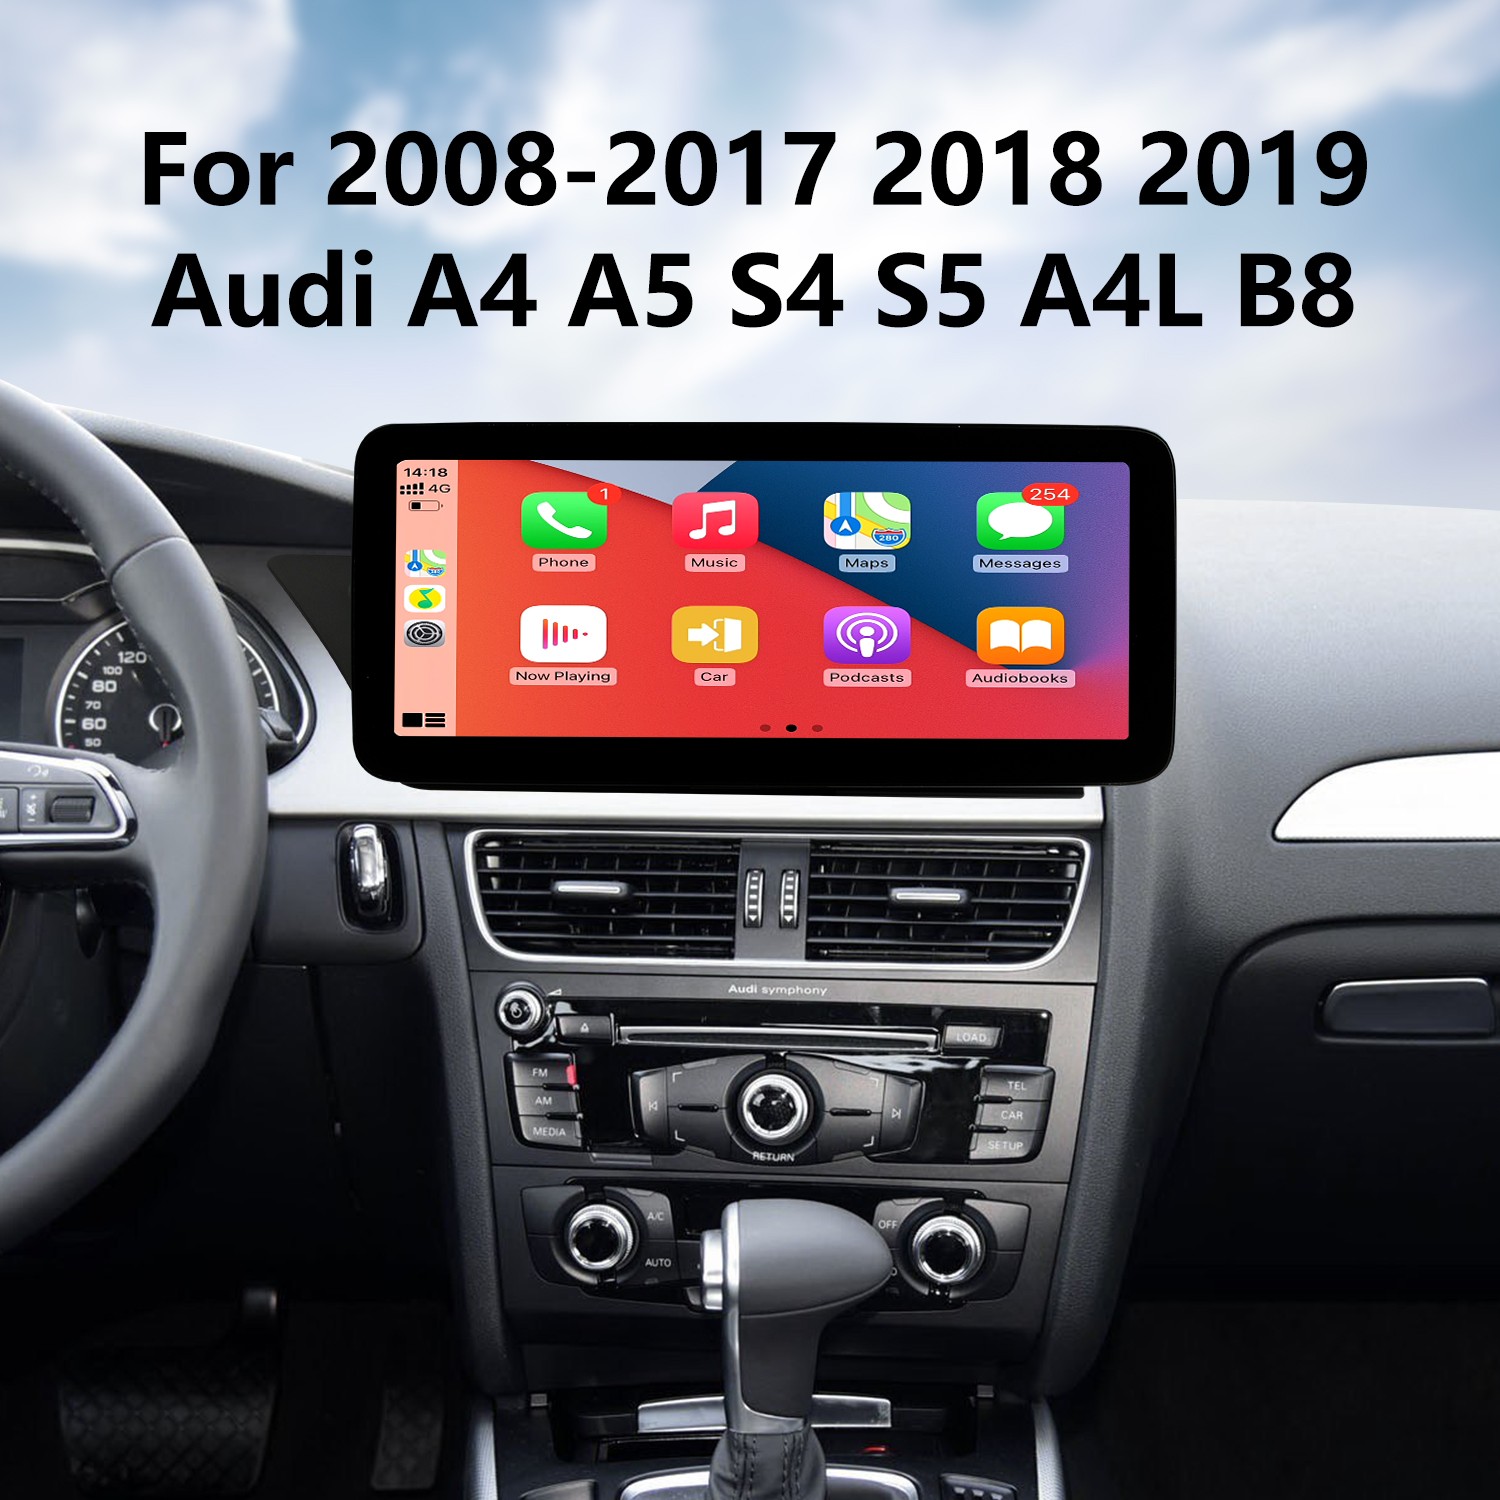 Bluetooth for car radio Audi Symphony 3 and much more